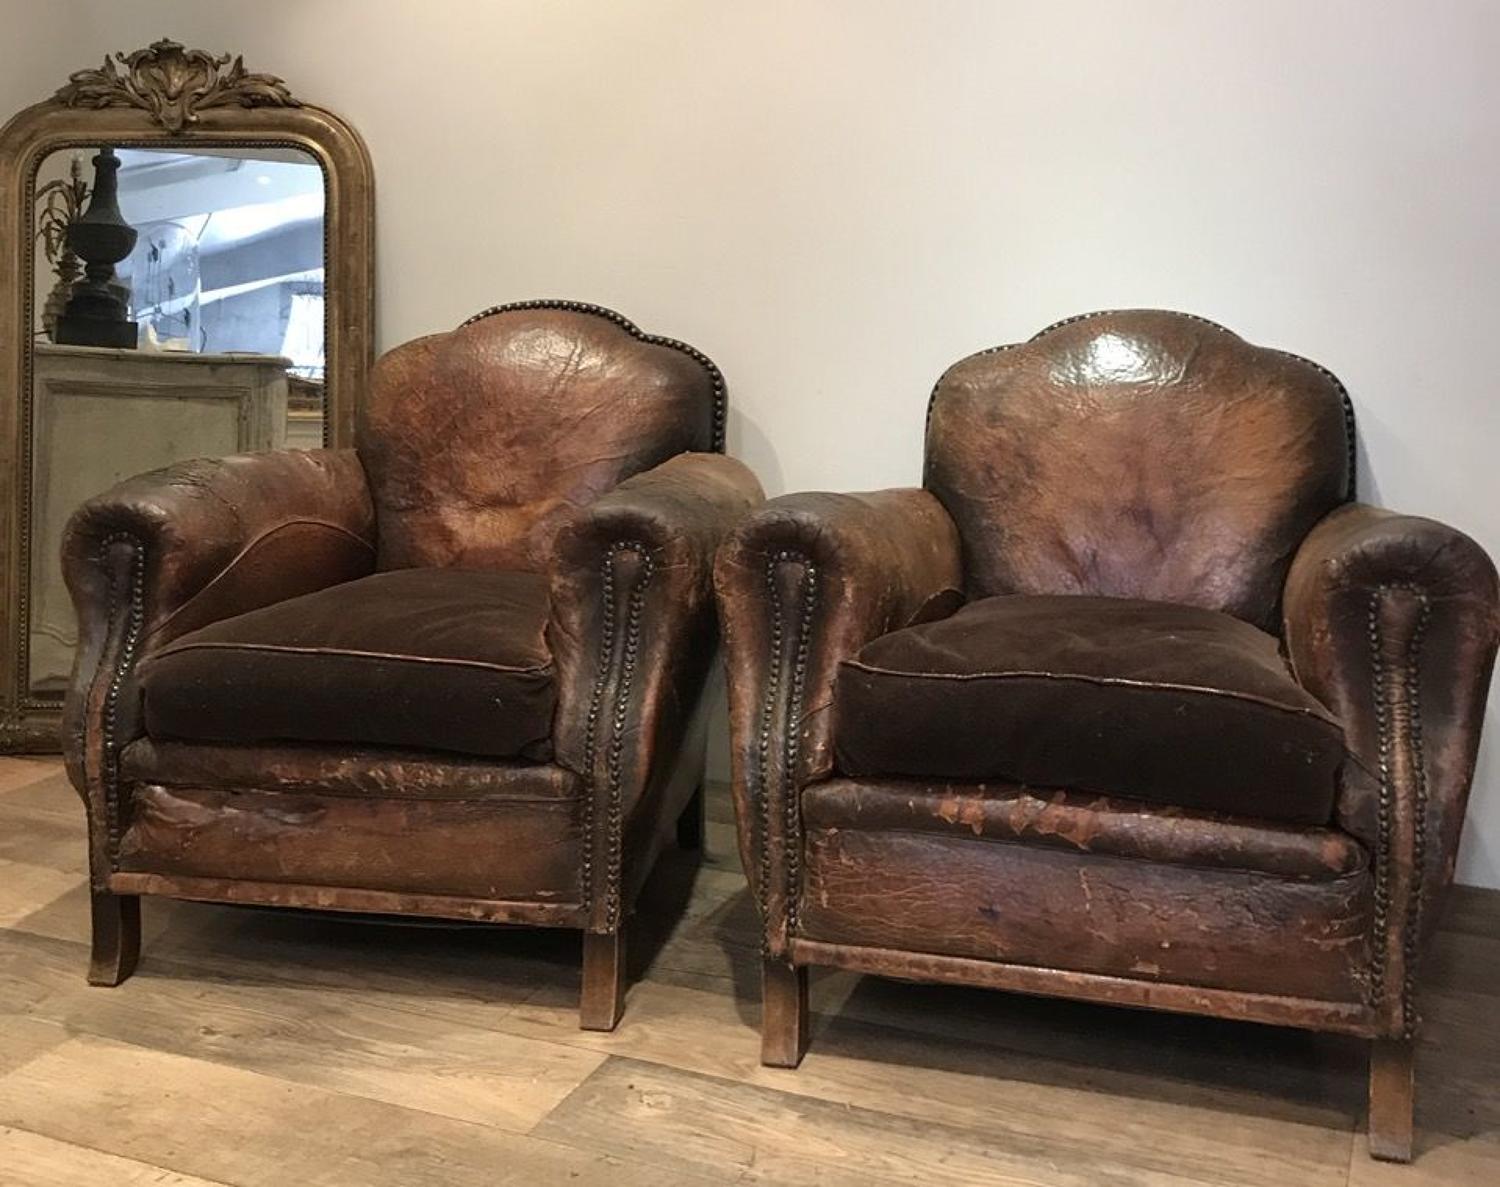 PAIR OF STUDDED LEATHER ARMCHAIRS